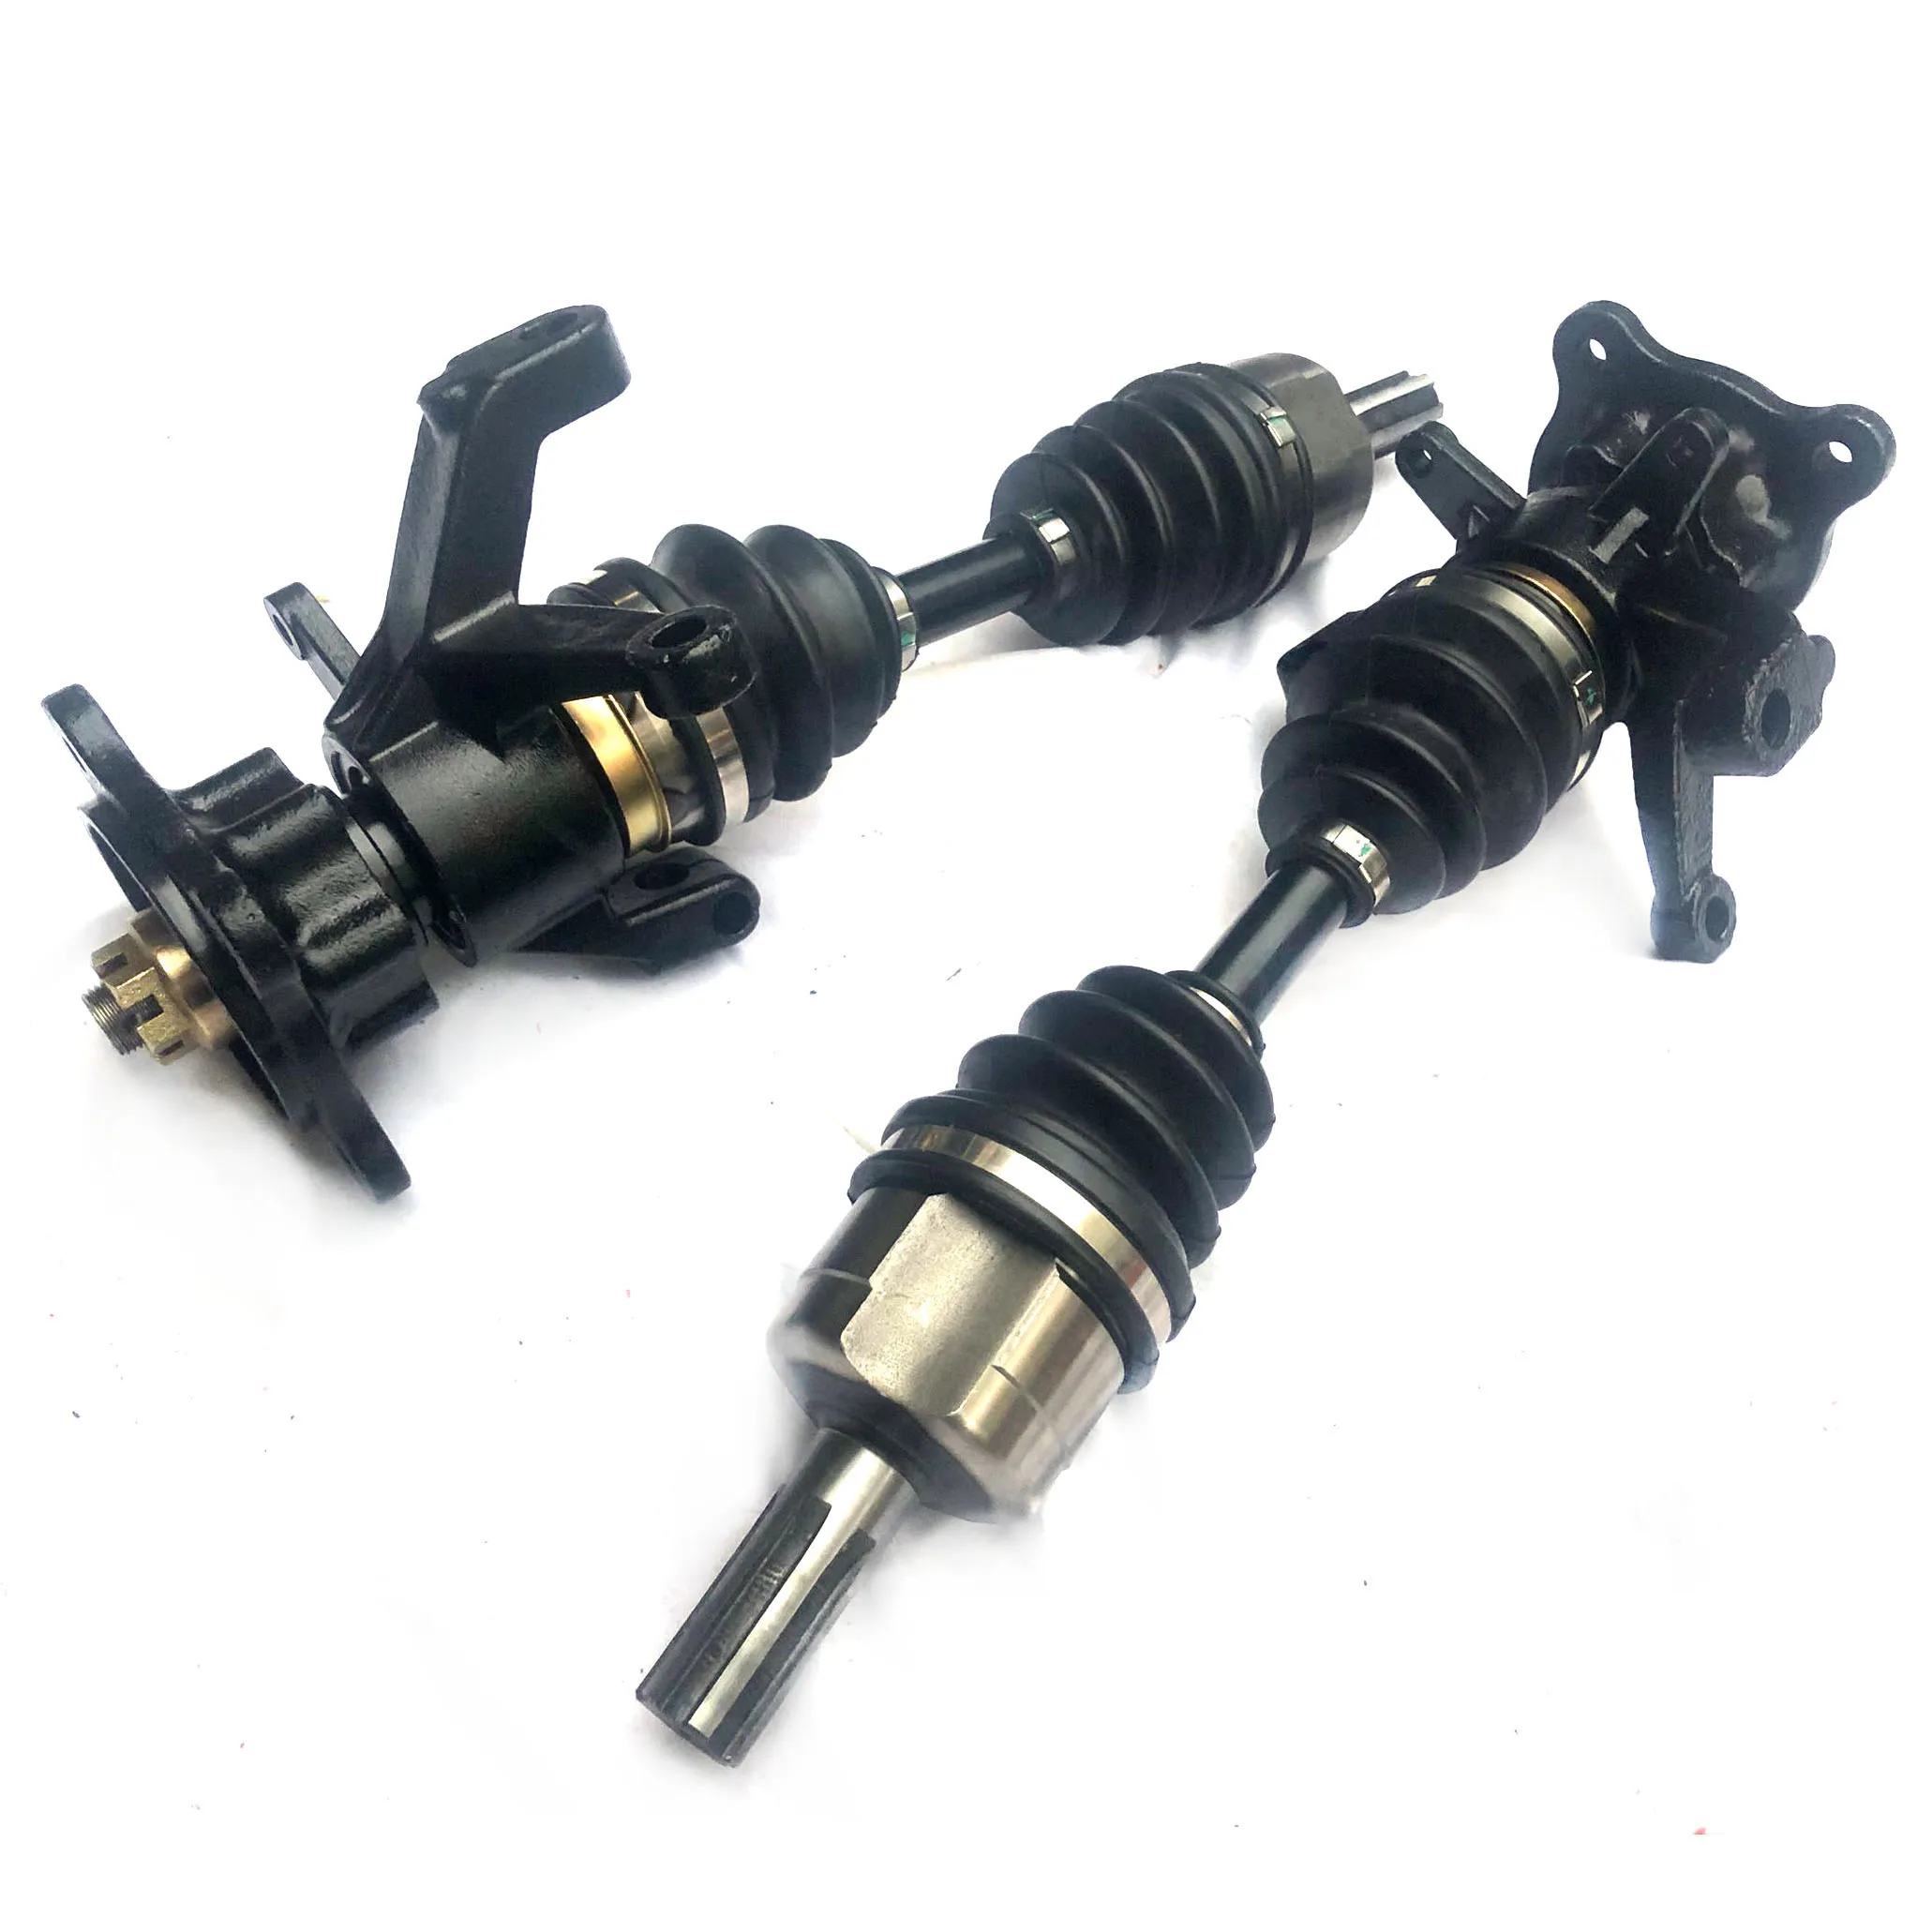 

4WD Front Drive Shaft Axle Universal Joints Spindles Knuckles Go Kart Karting Four Wheel GY6 125 150 200cc ATV UTV Buggy Quad